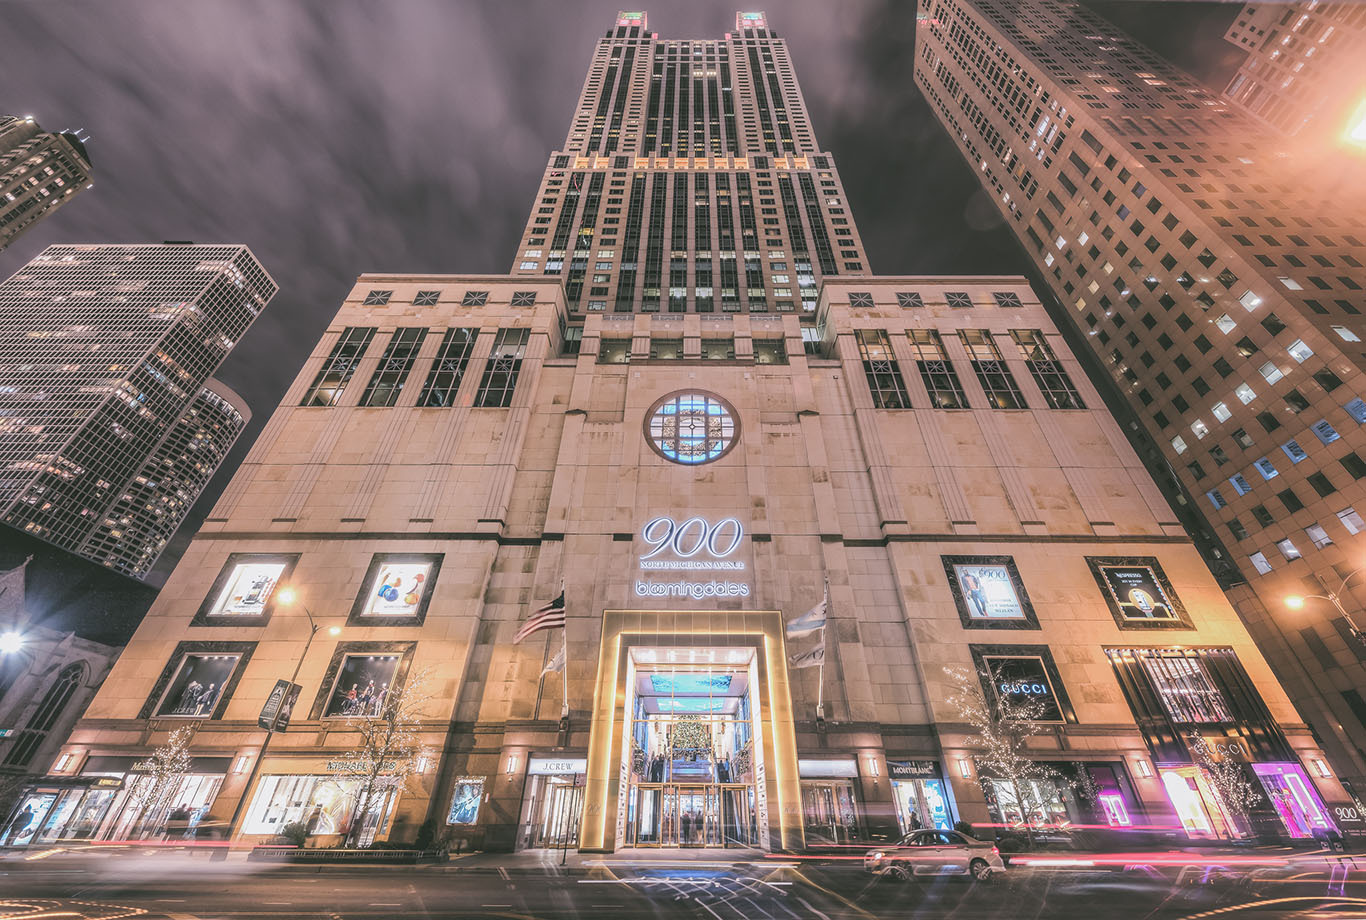 Main Home - 900 North Michigan Shops  Chicago's Iconic Shopping Collection